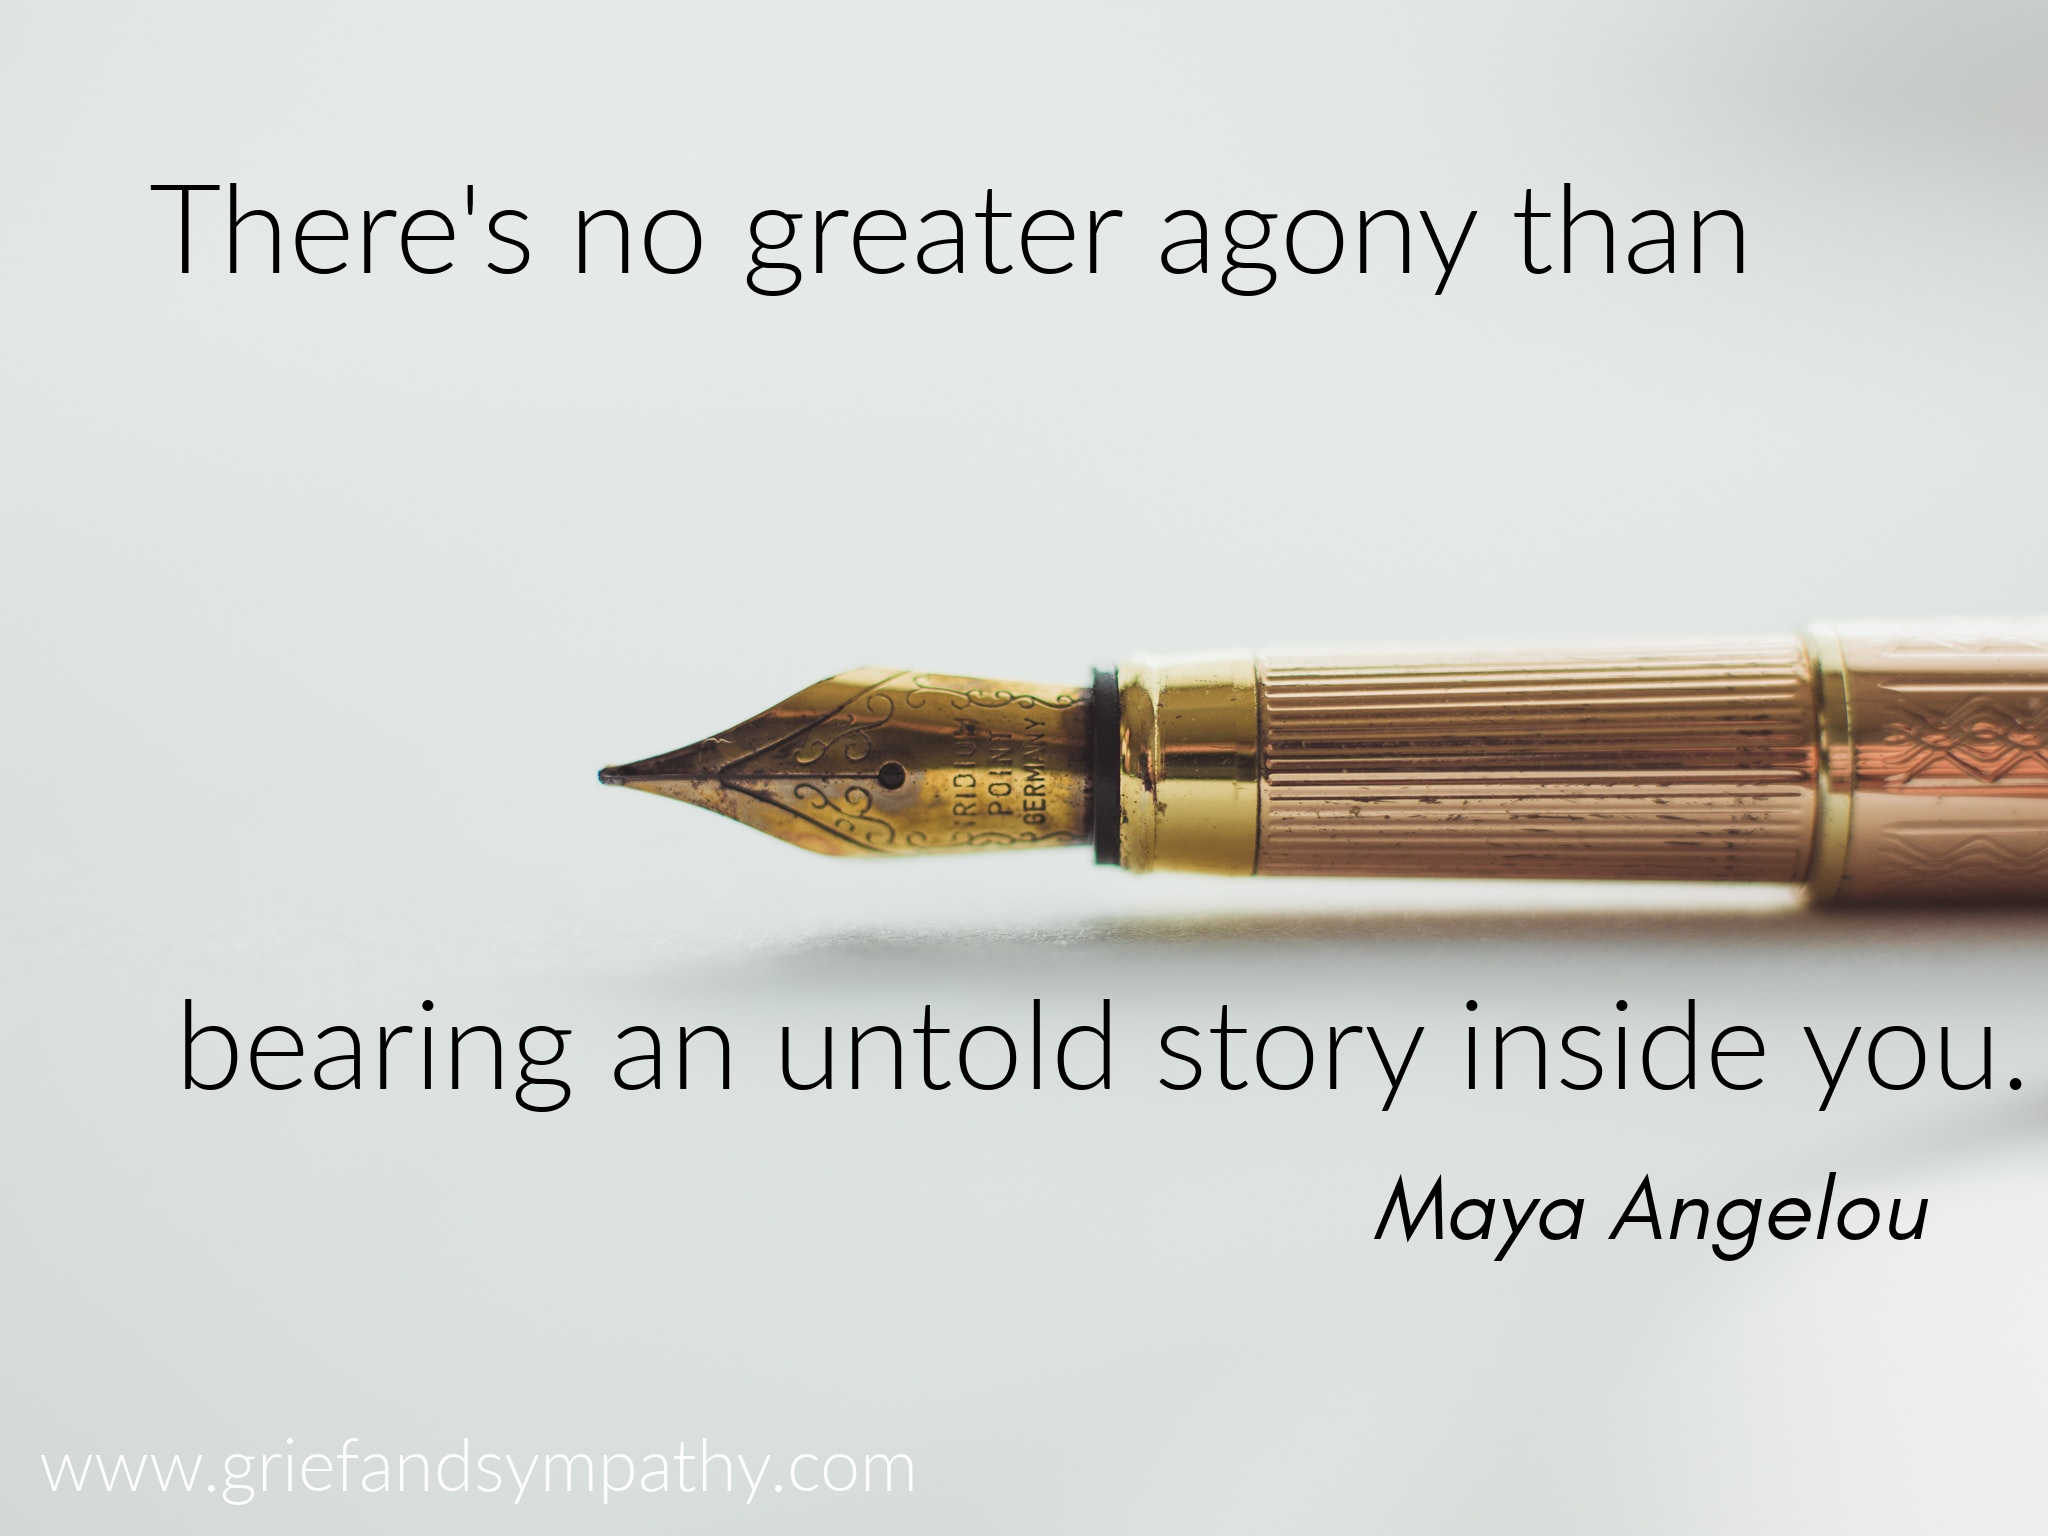 There's no greater agony than bearing an untold story inside you. Maya Angelou.